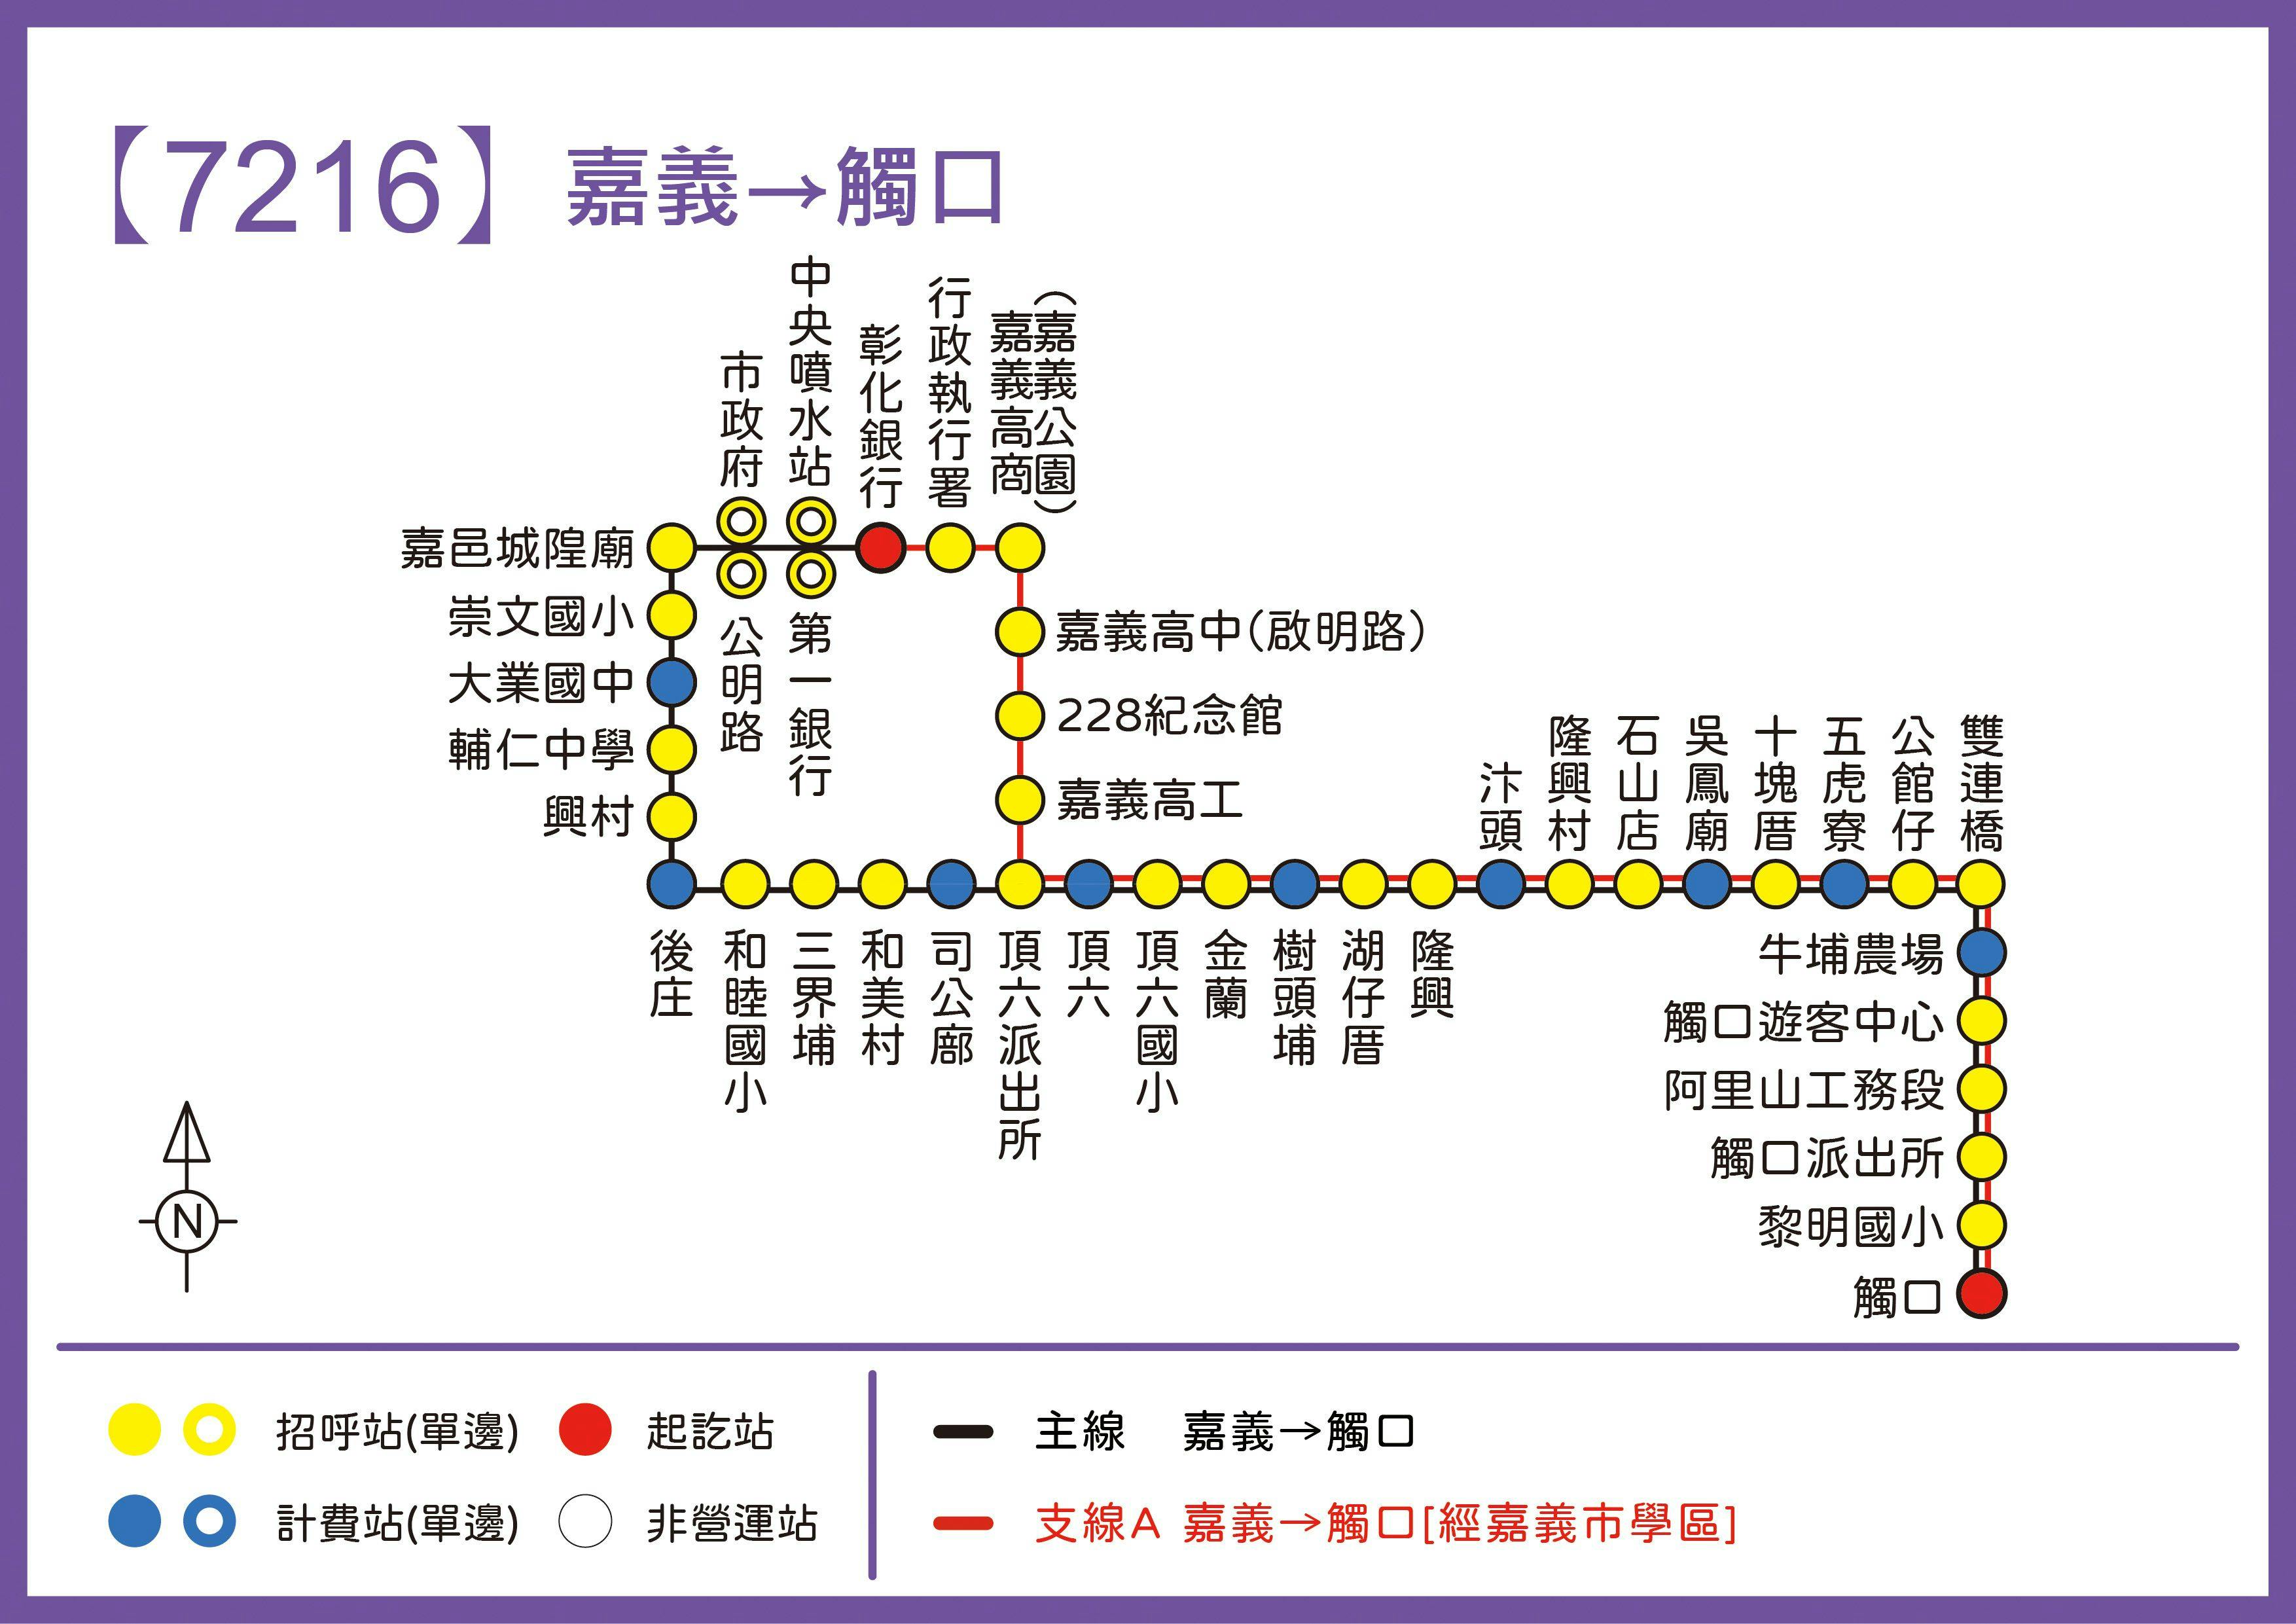 7216Route Map-Chiayi Bus